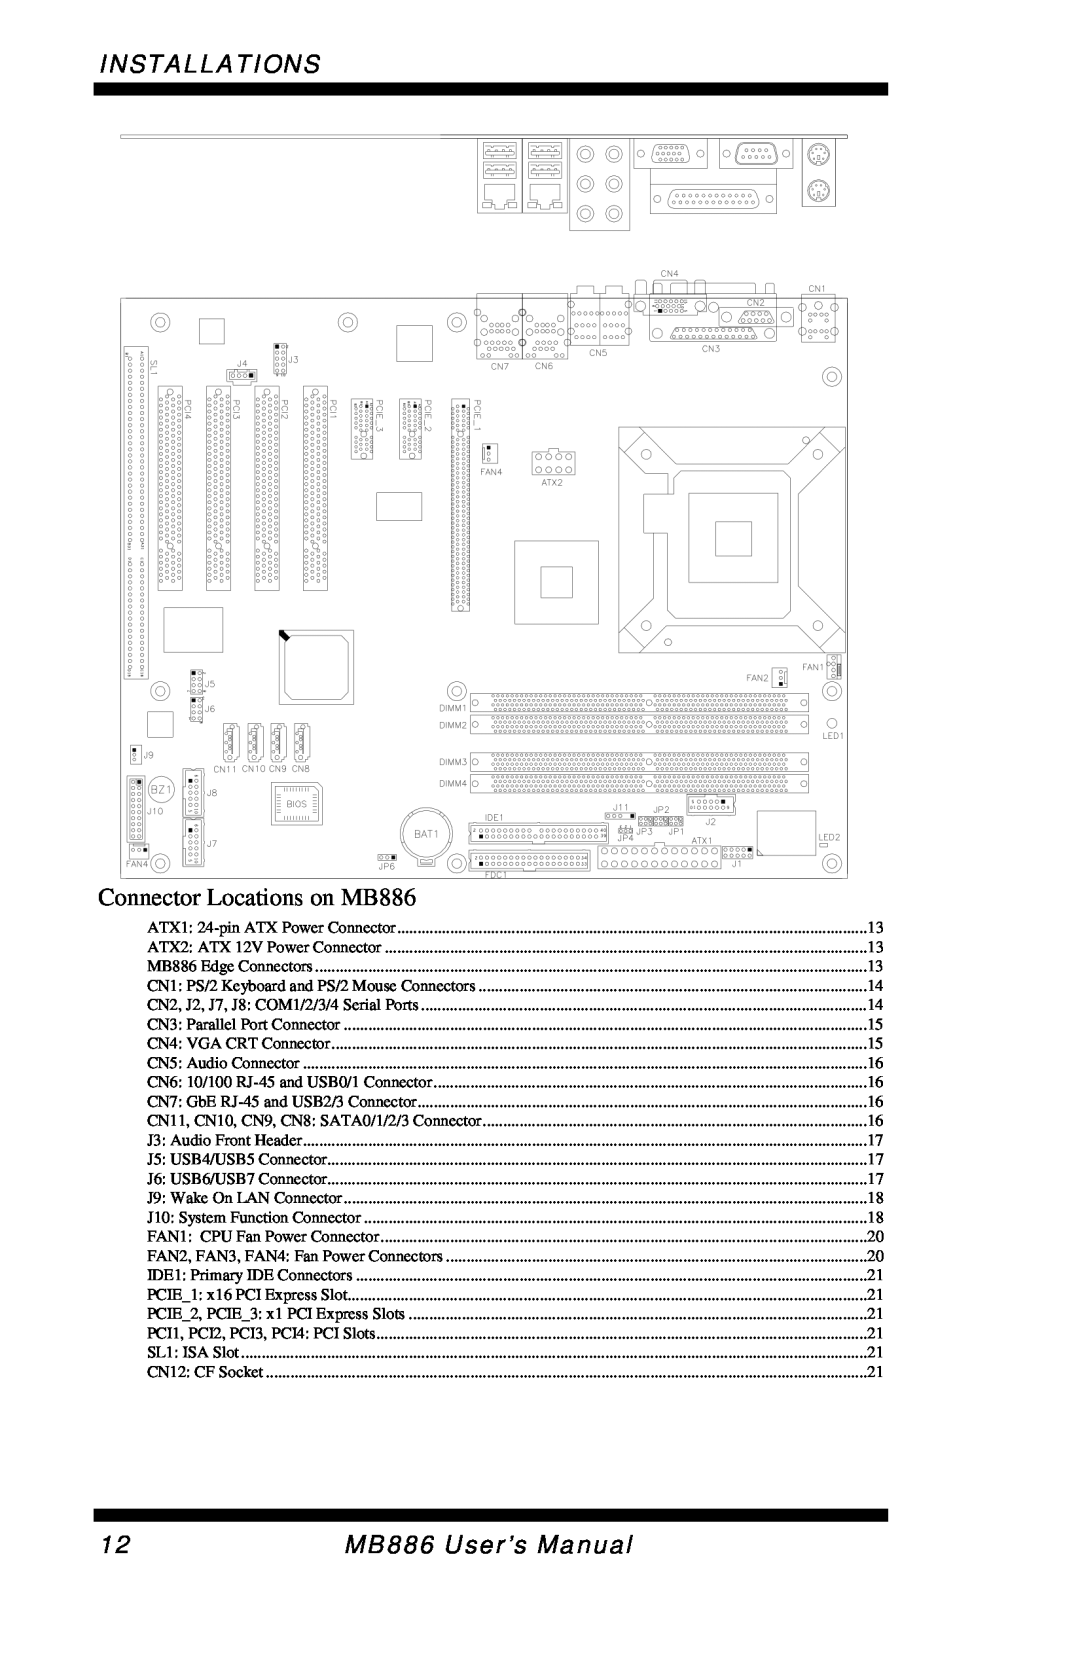 Intel user manual Installations, Connector Locations on MB886 